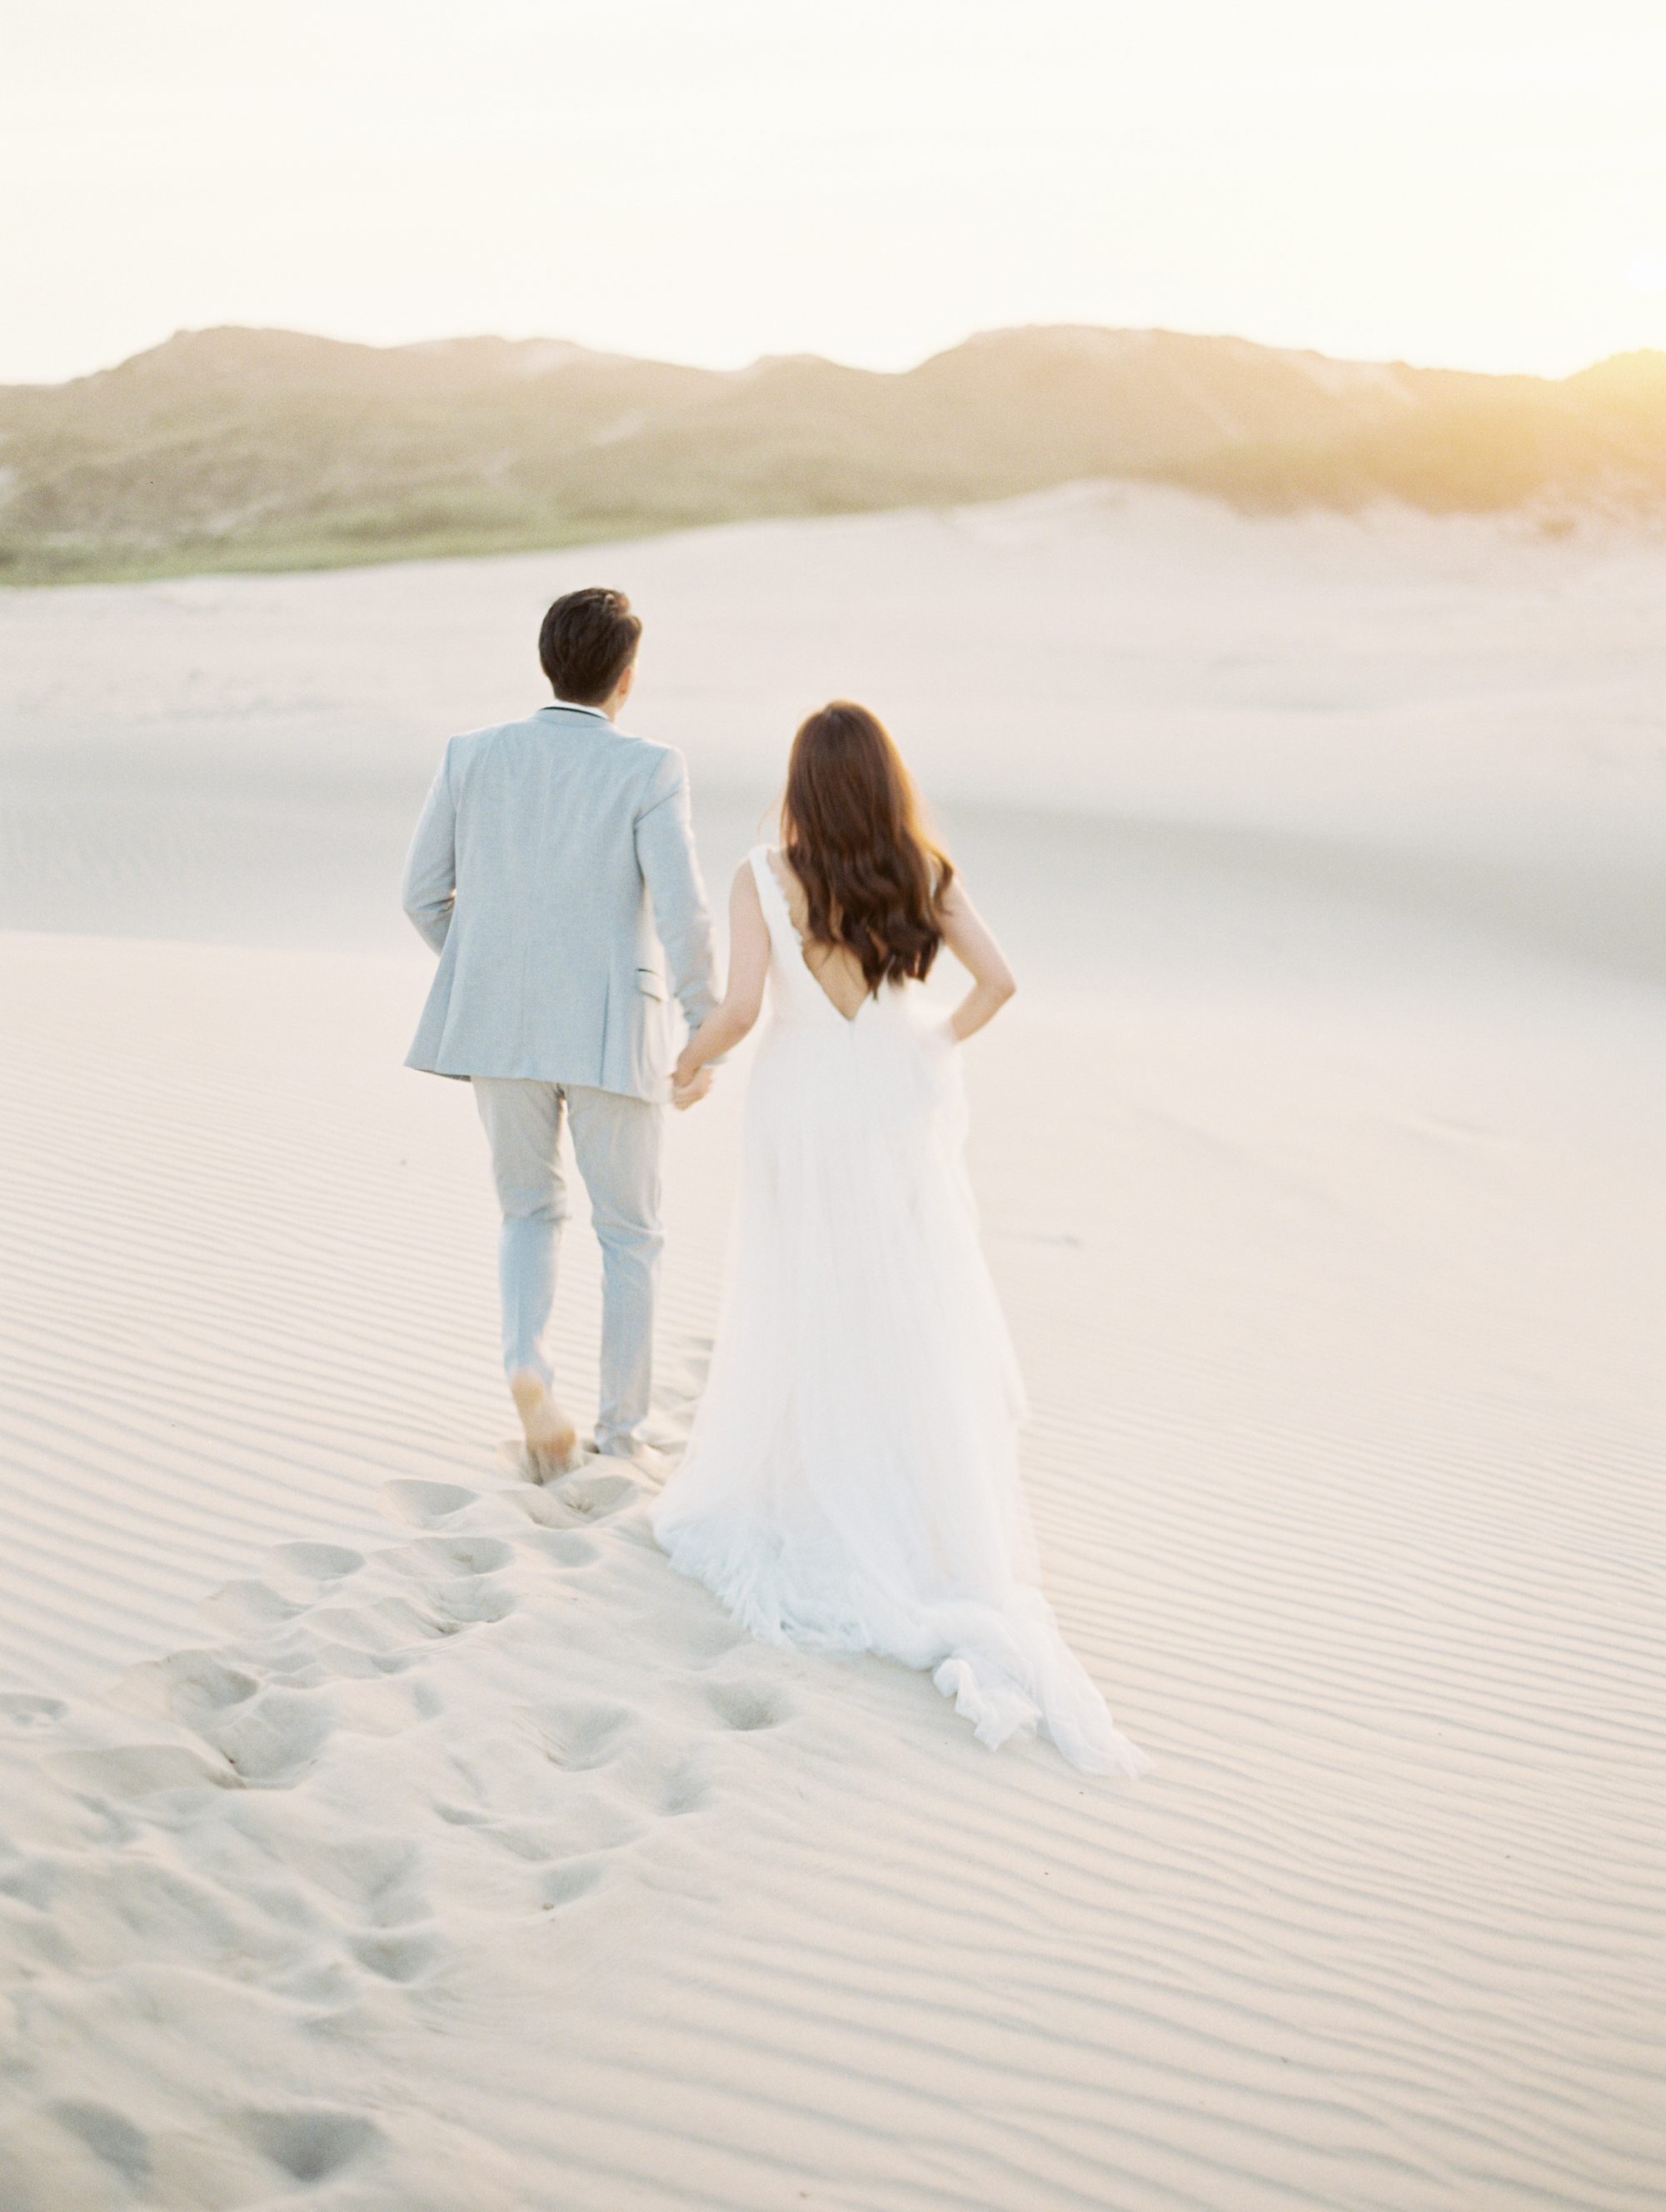 Romantic engagement session locations in Southern California